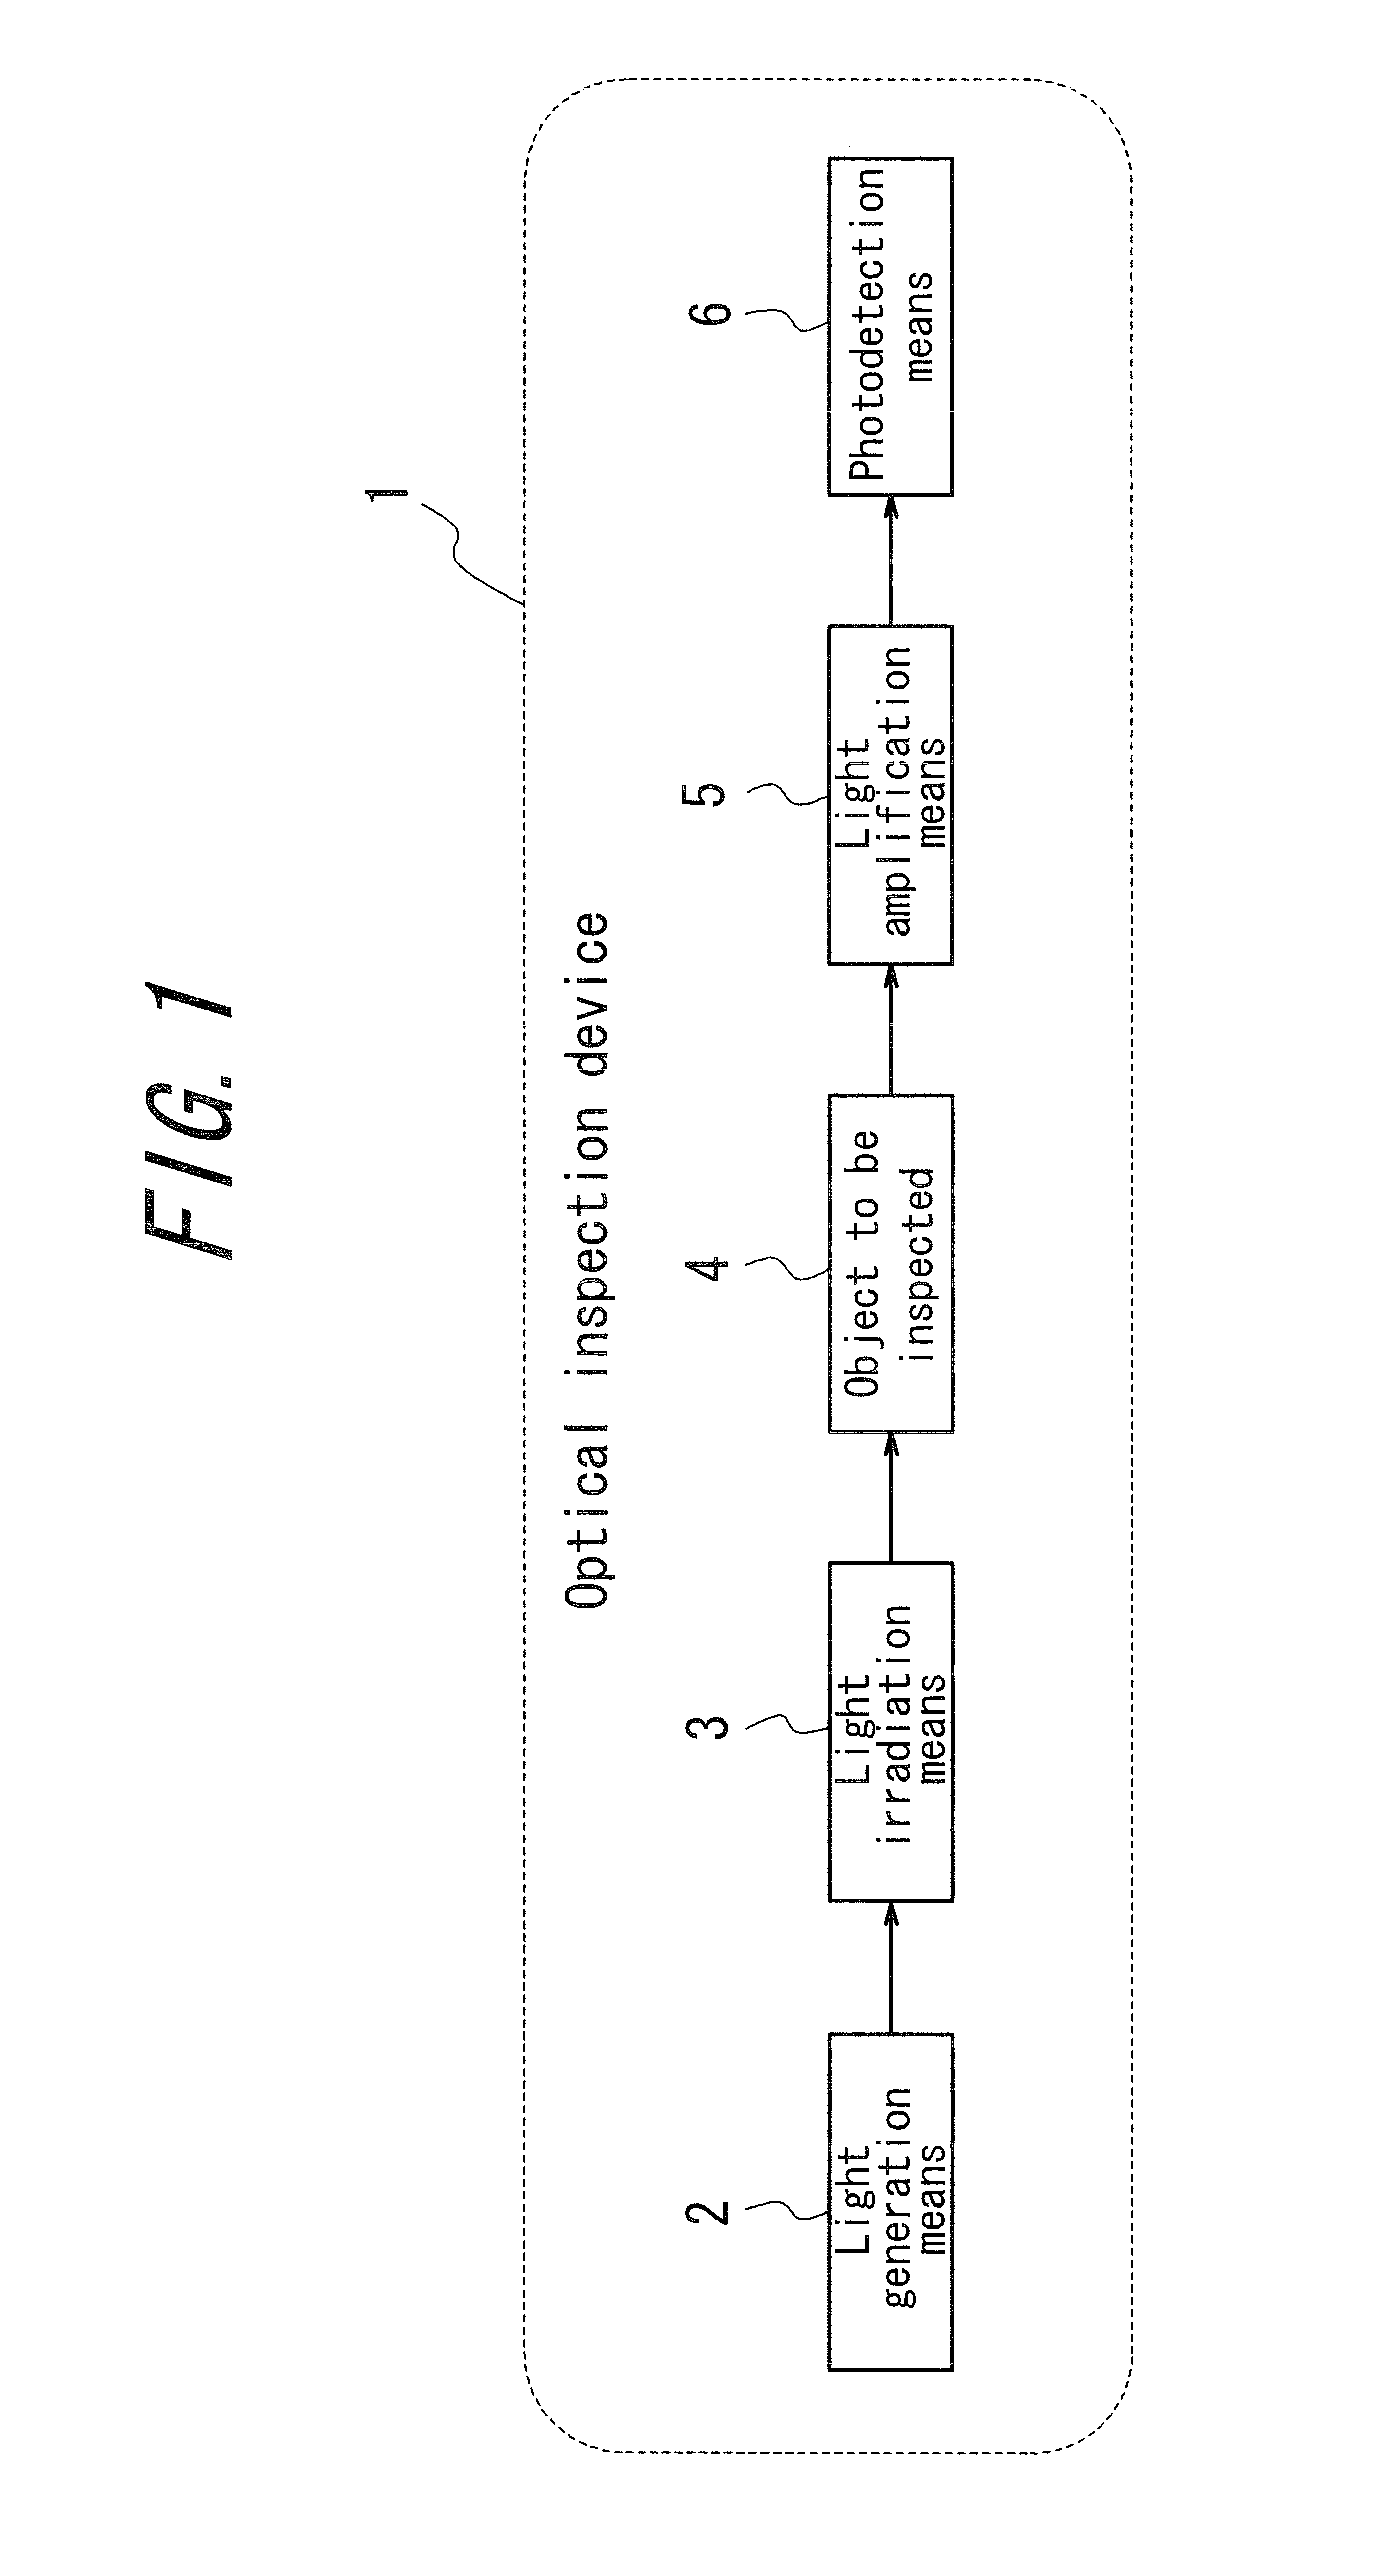 Optical inspection device, electromagnetic wave detection method, electromagnetic wave detection device, organism observation method, microscope, endoscope, and optical tomographic image generation device